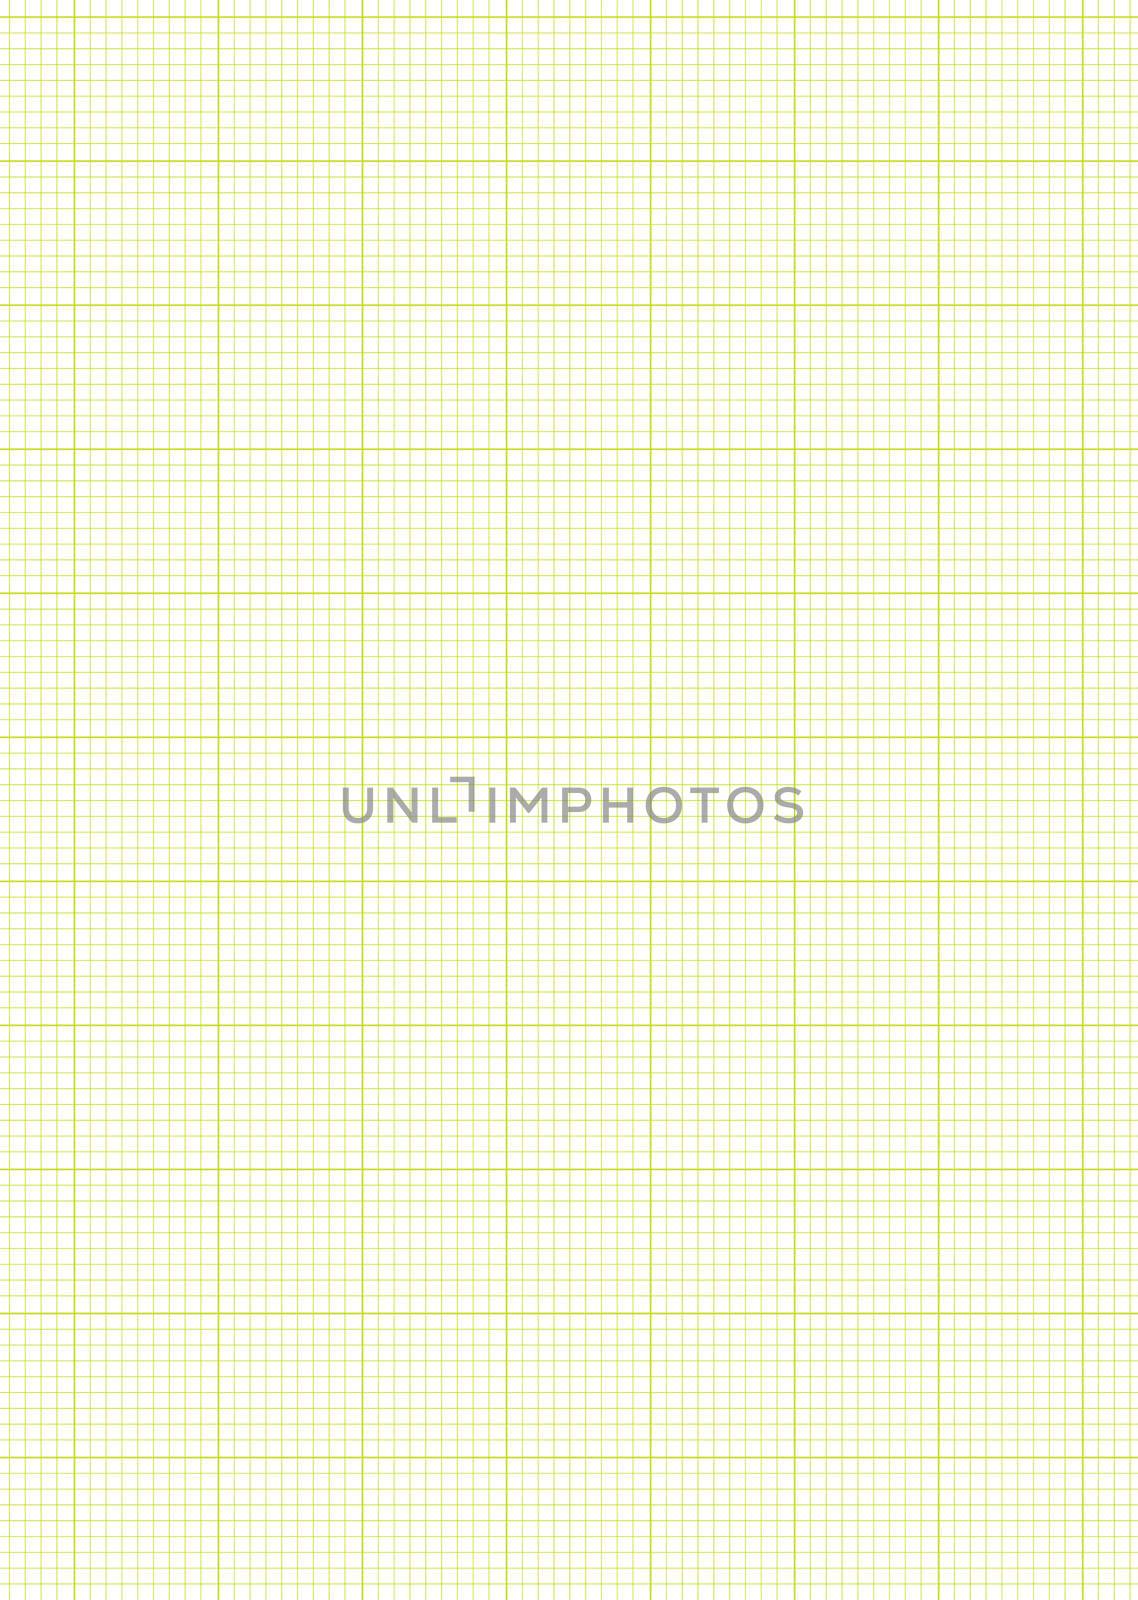 Green A4 grid or graph paper with white maths background